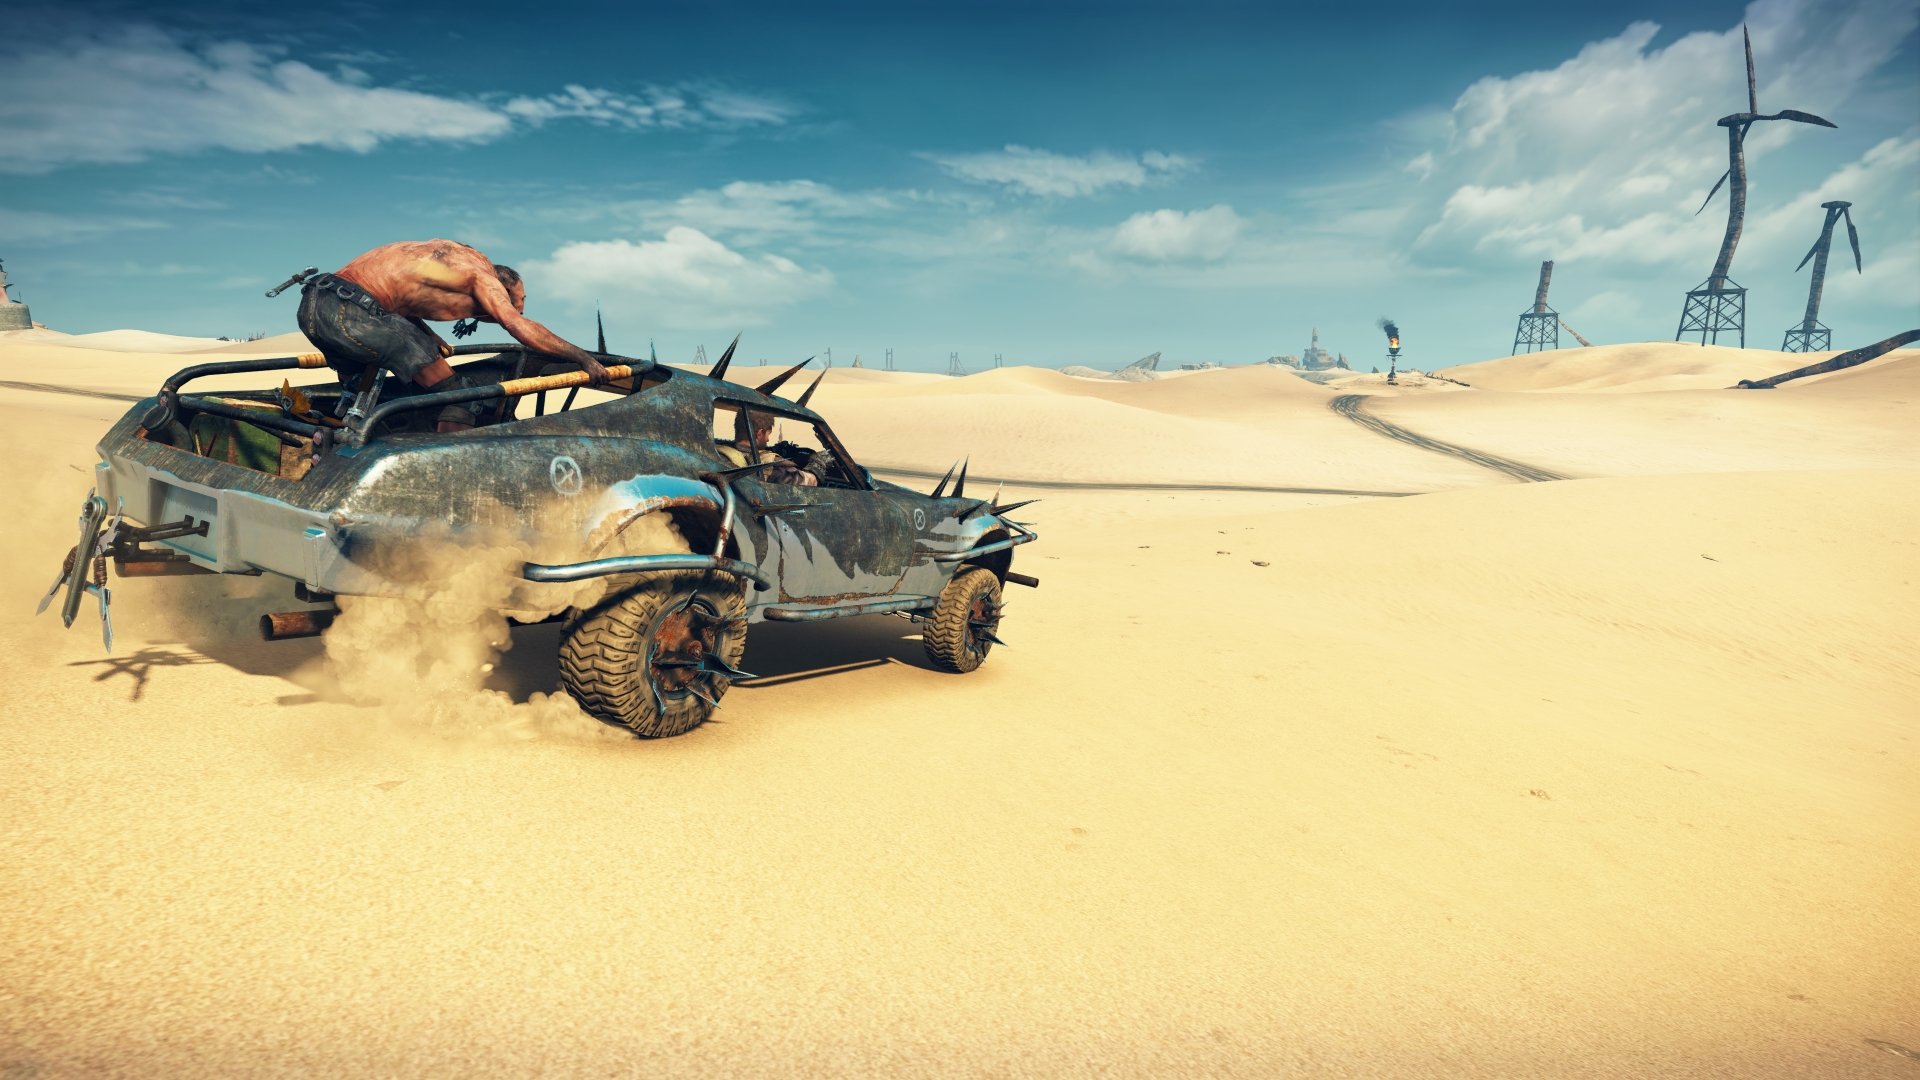 General 1920x1080 PC gaming video games Mad Max (game) desert apocalyptic car Mad Max screen shot